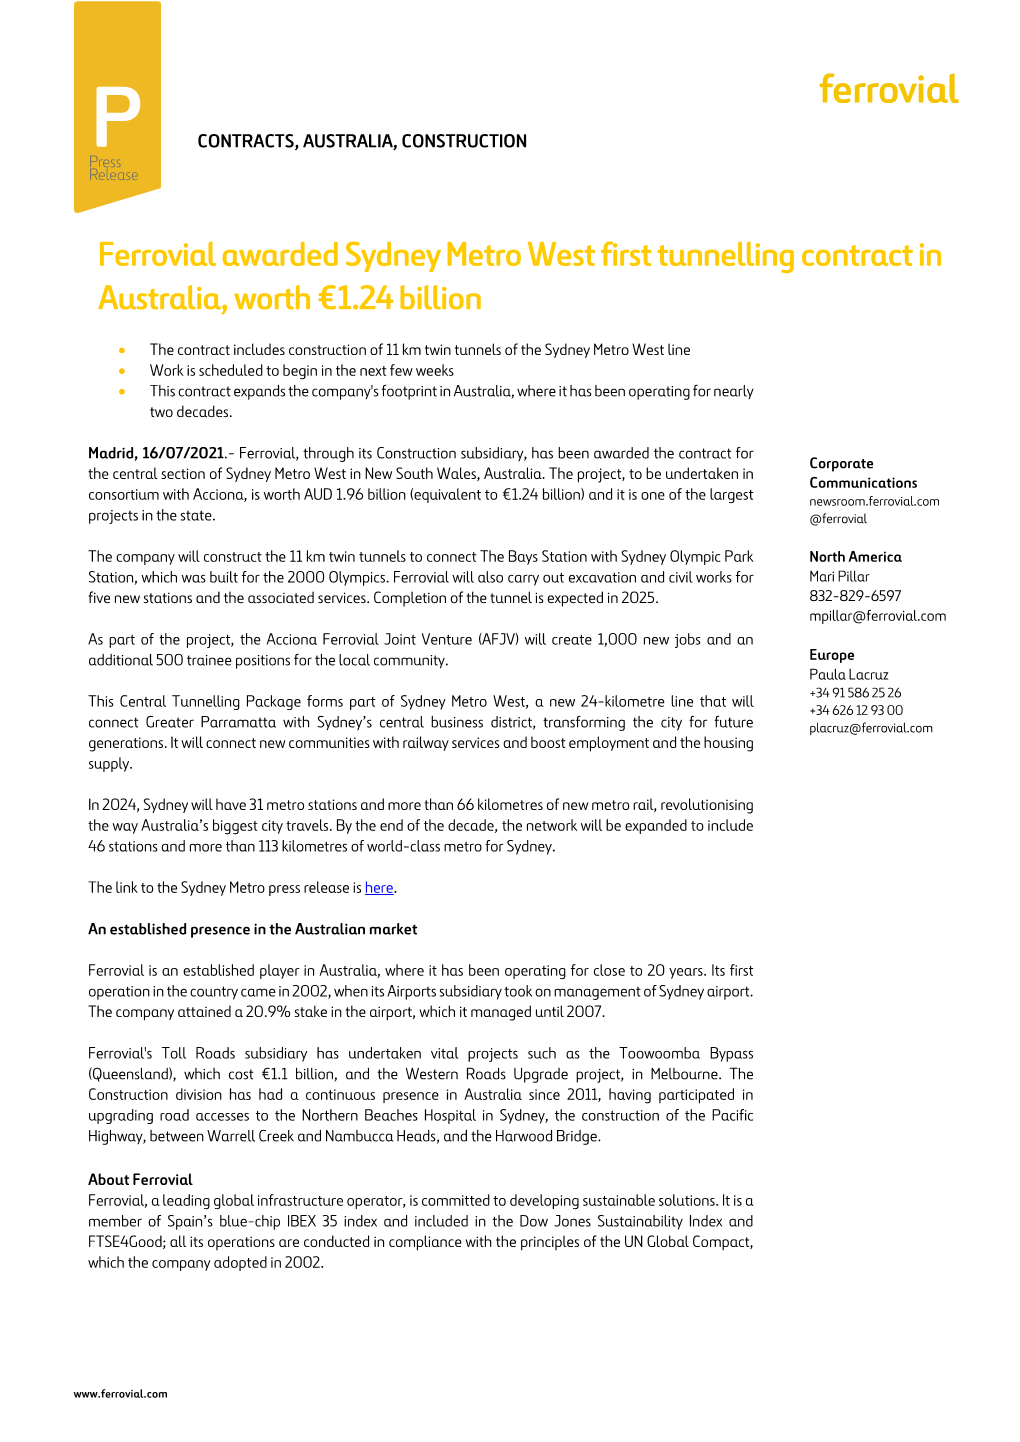 Ferrovial Awarded Sydney Metro West First Tunnelling Contract in Australia, Worth €1.24 Billion